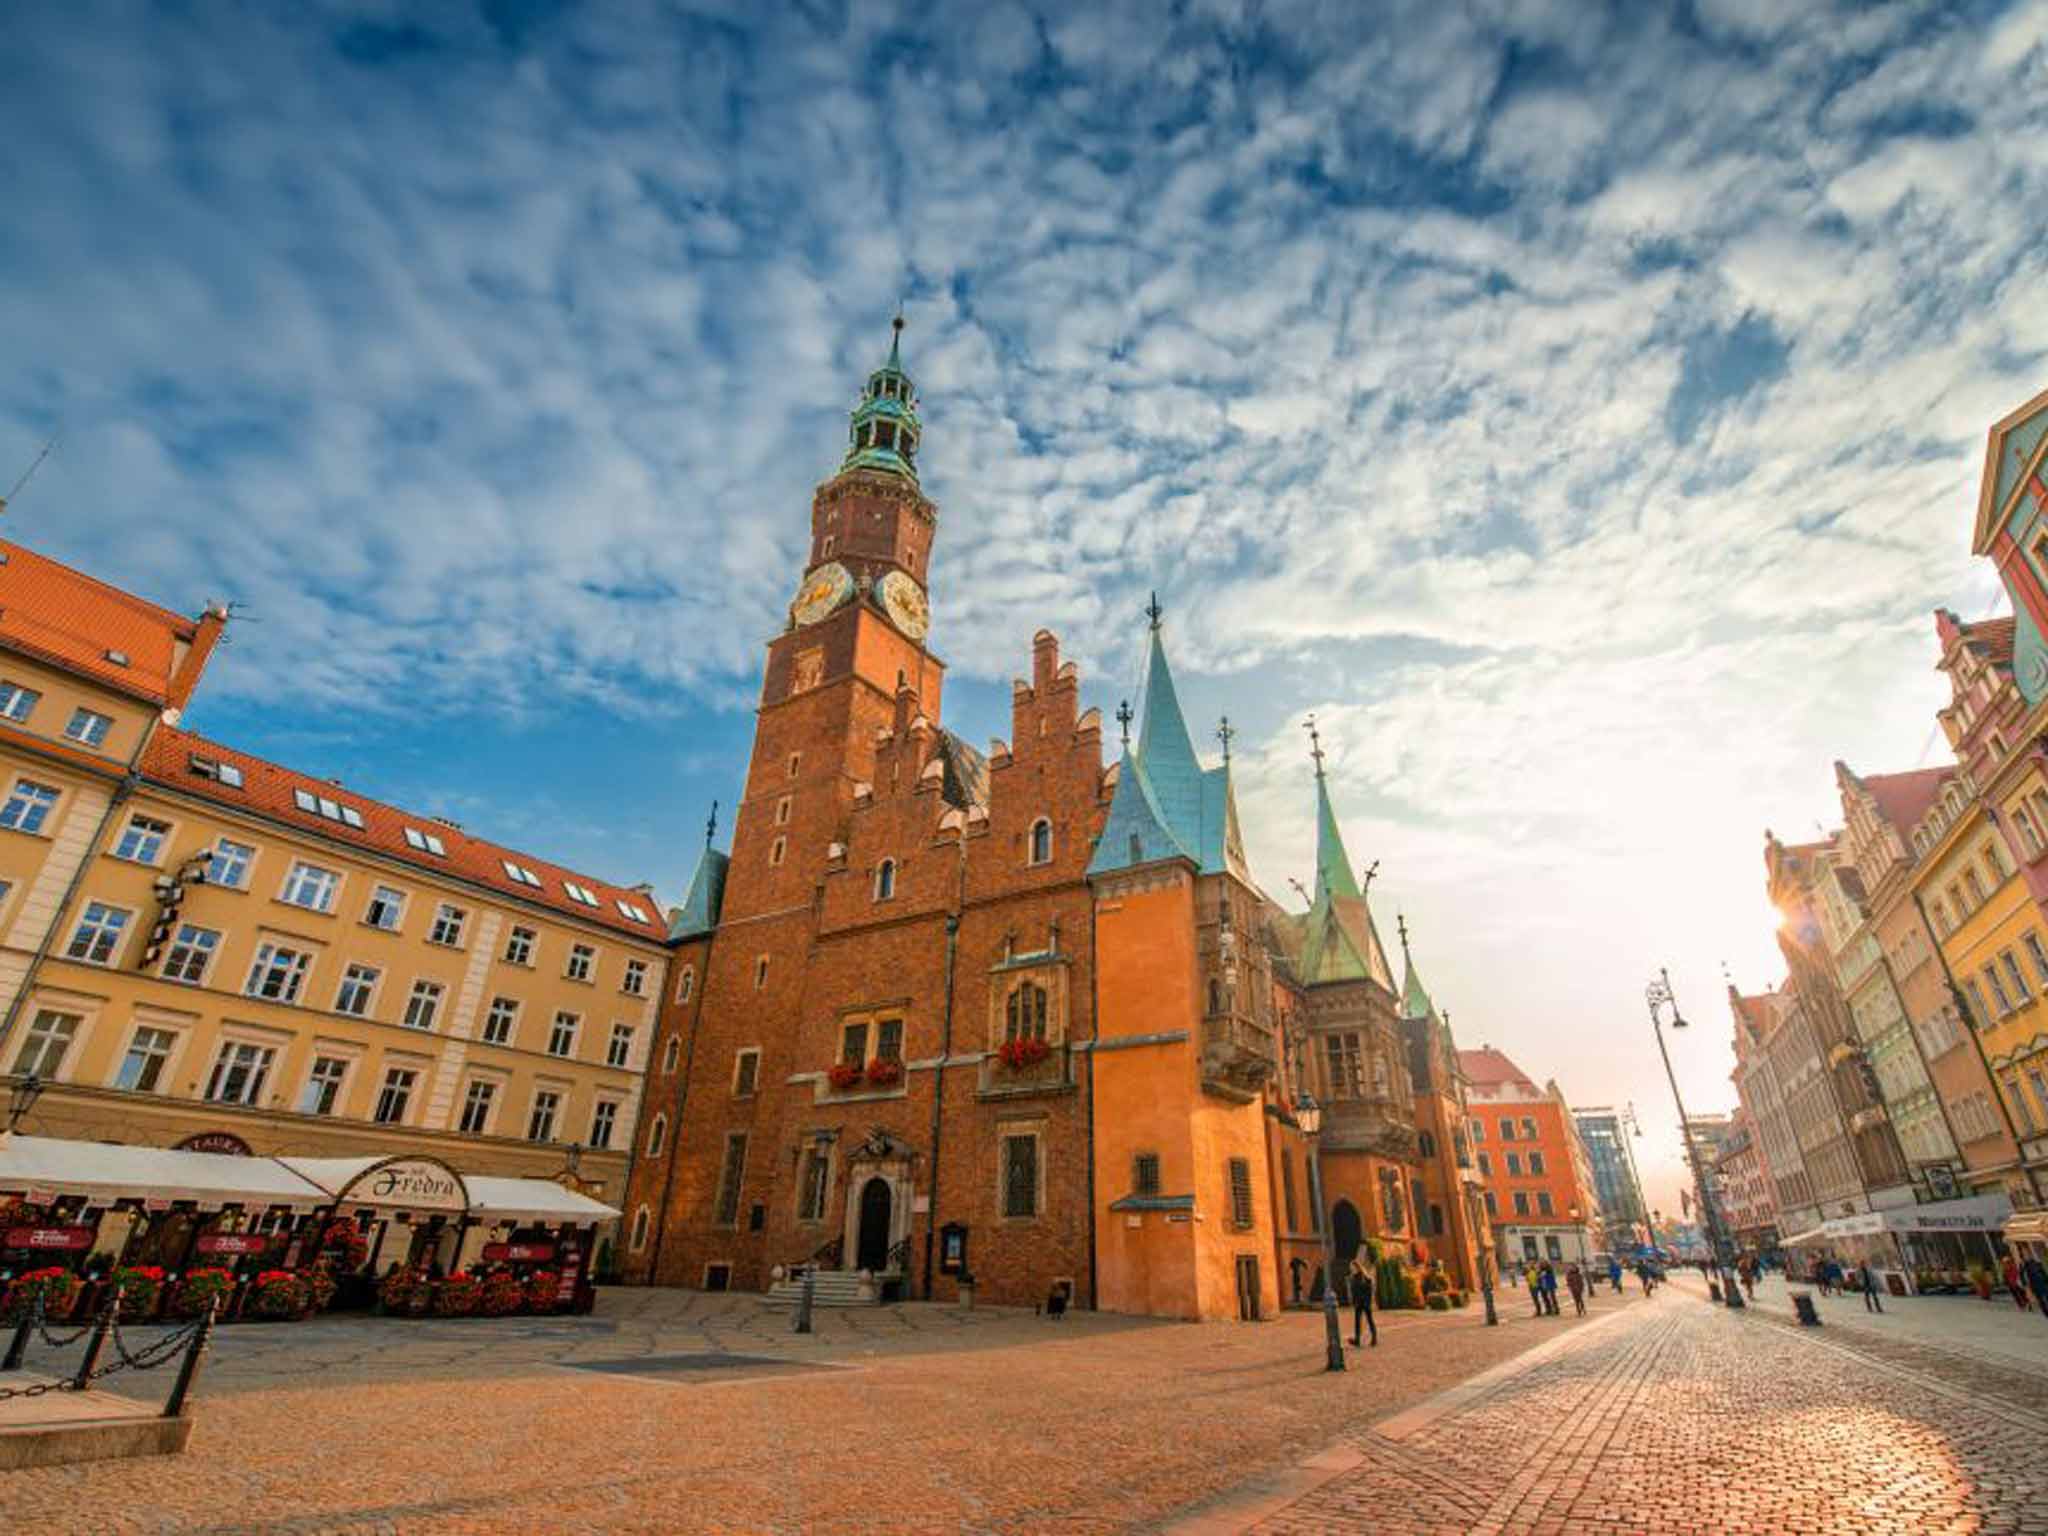 The 25 most impressive buildings in Wroclaw, Poland - WroclawGuide.com